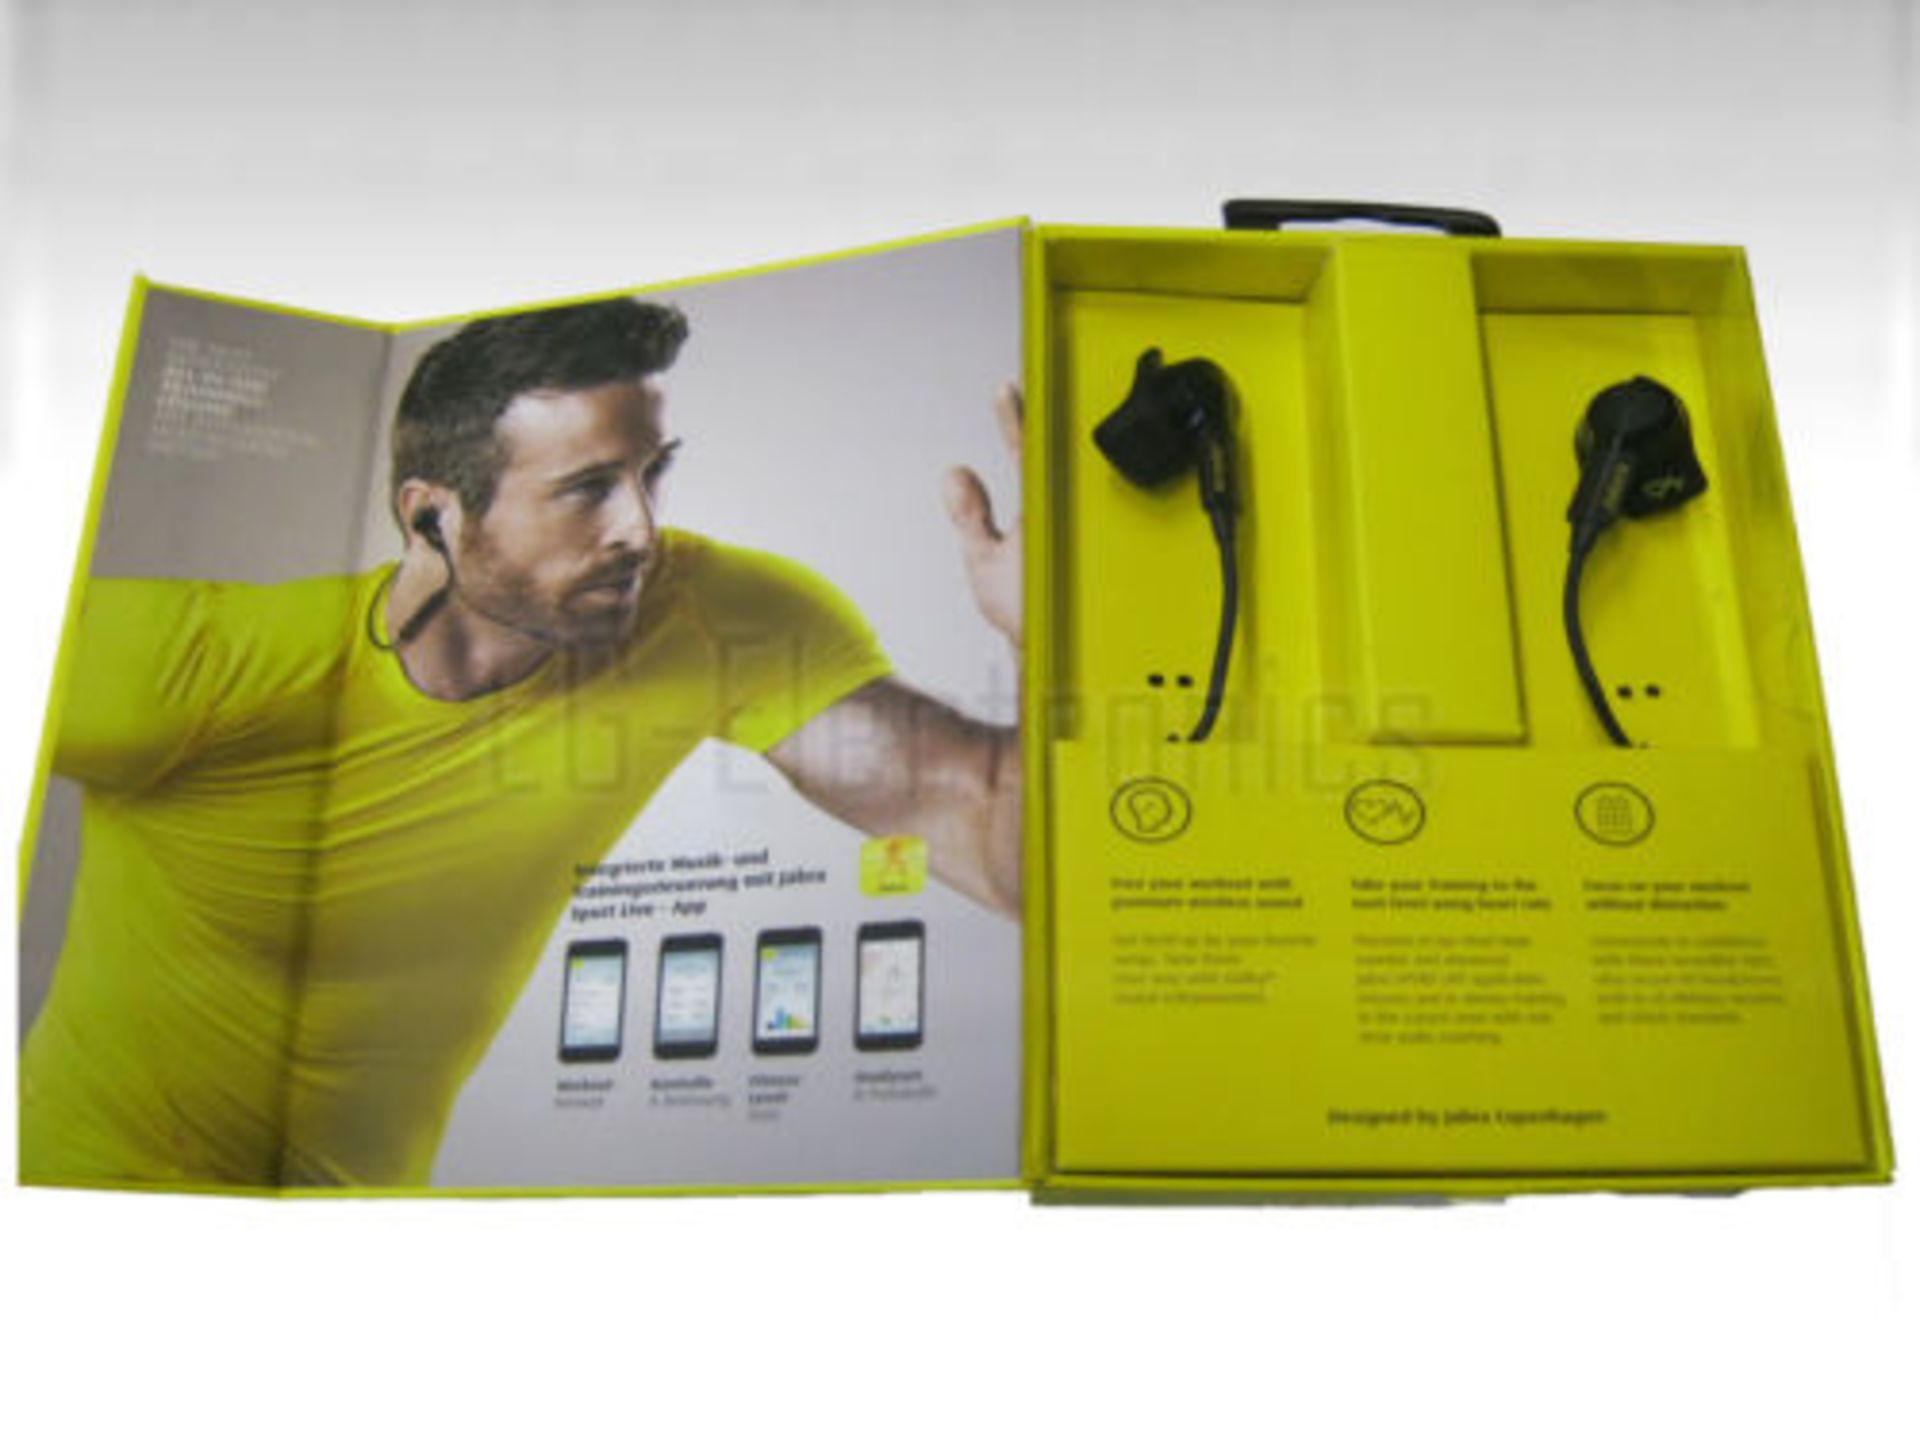 V *TRADE QTY* Brand New Jabra Sport Pulse Wireless In Ear Headphones With Built In Heart Monitor (US - Image 2 of 2